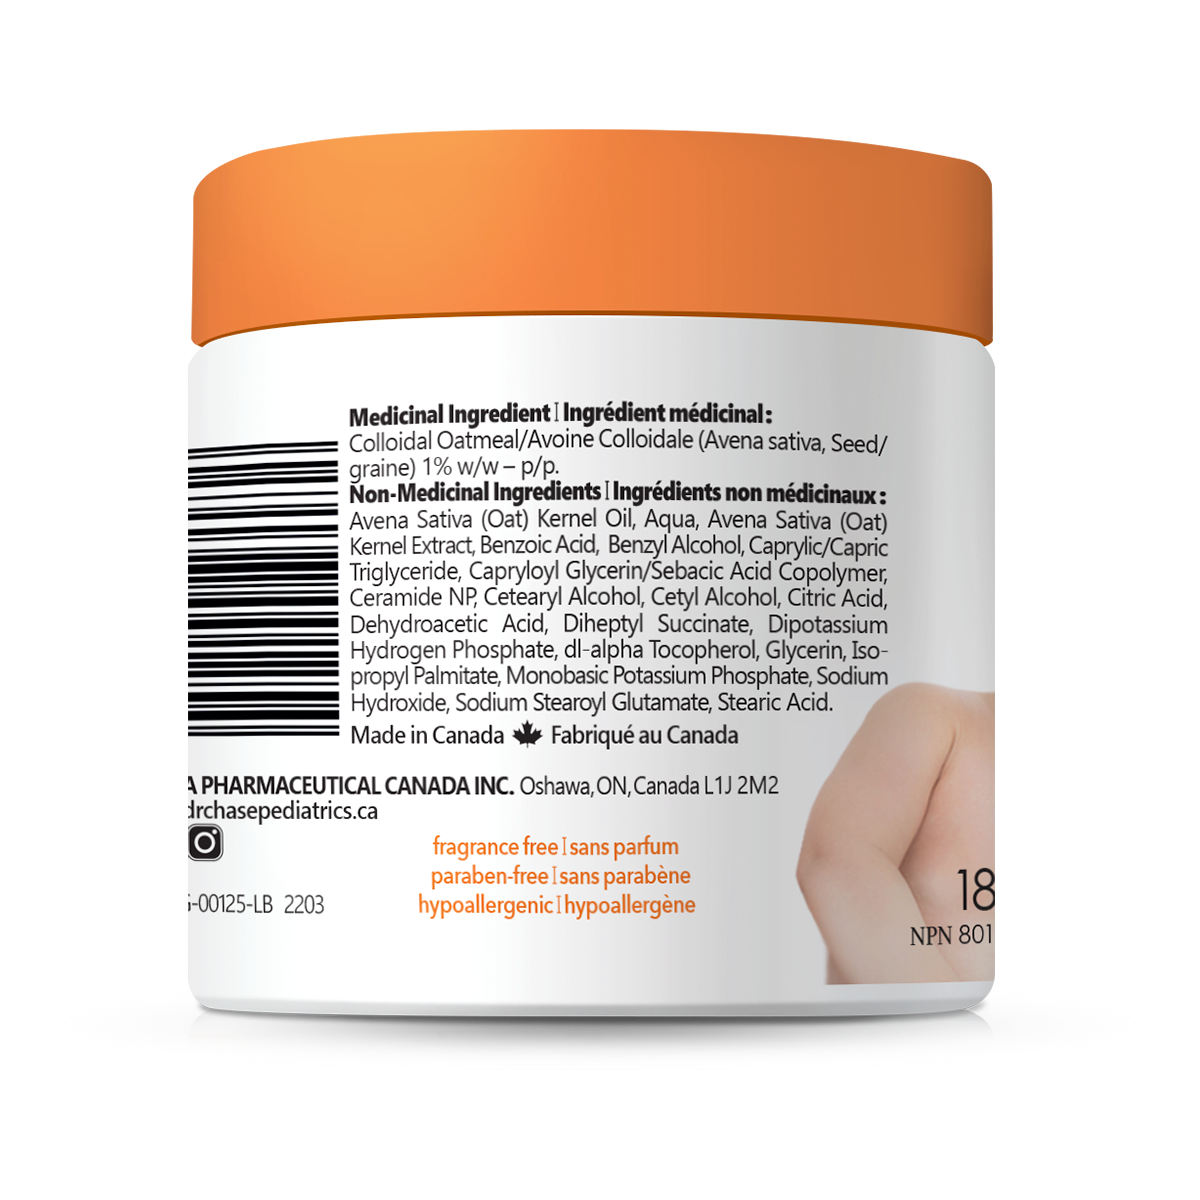 Ingredient information for X-ZEMATM Intensive Care Relief Balm